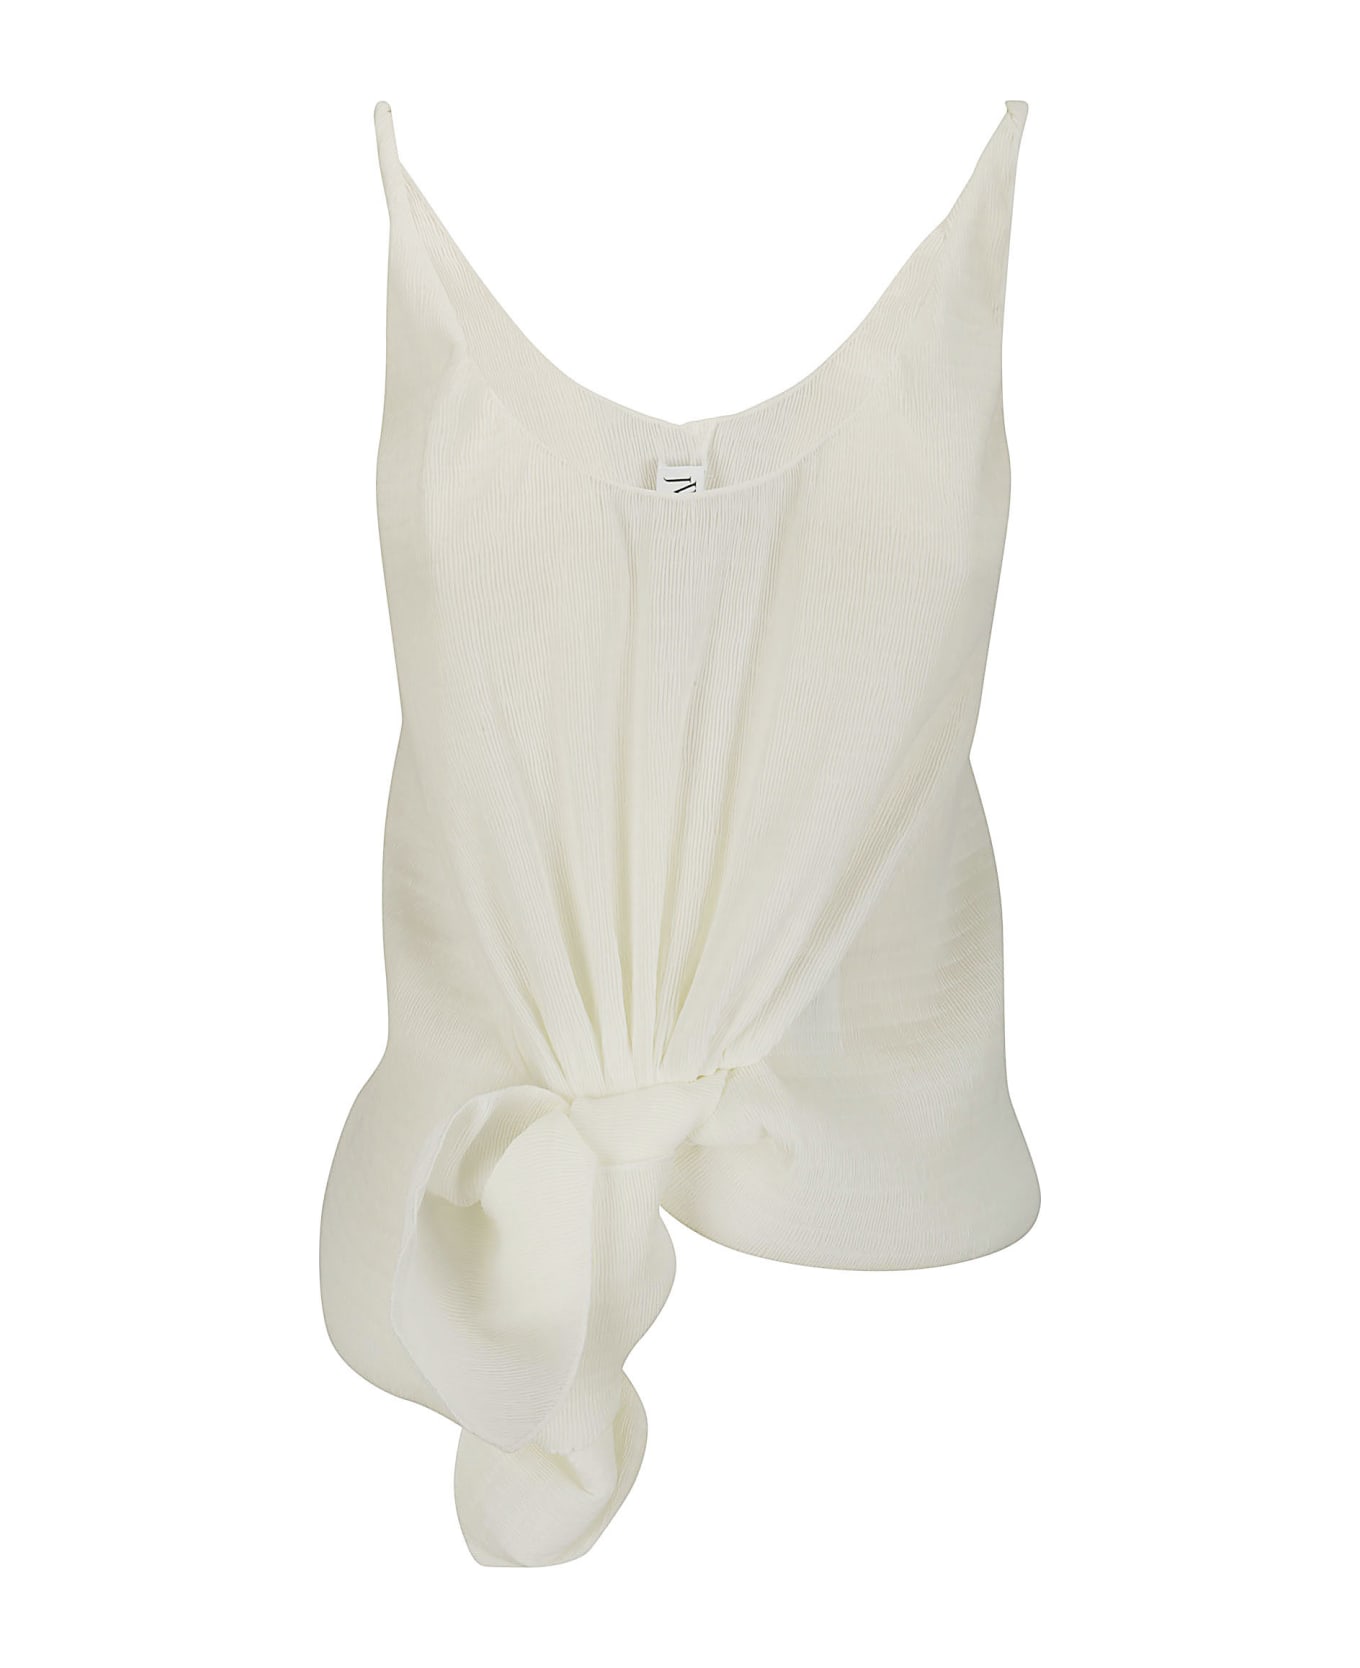 J.W. Anderson Knot Front Strap Top - OFF WHITE 